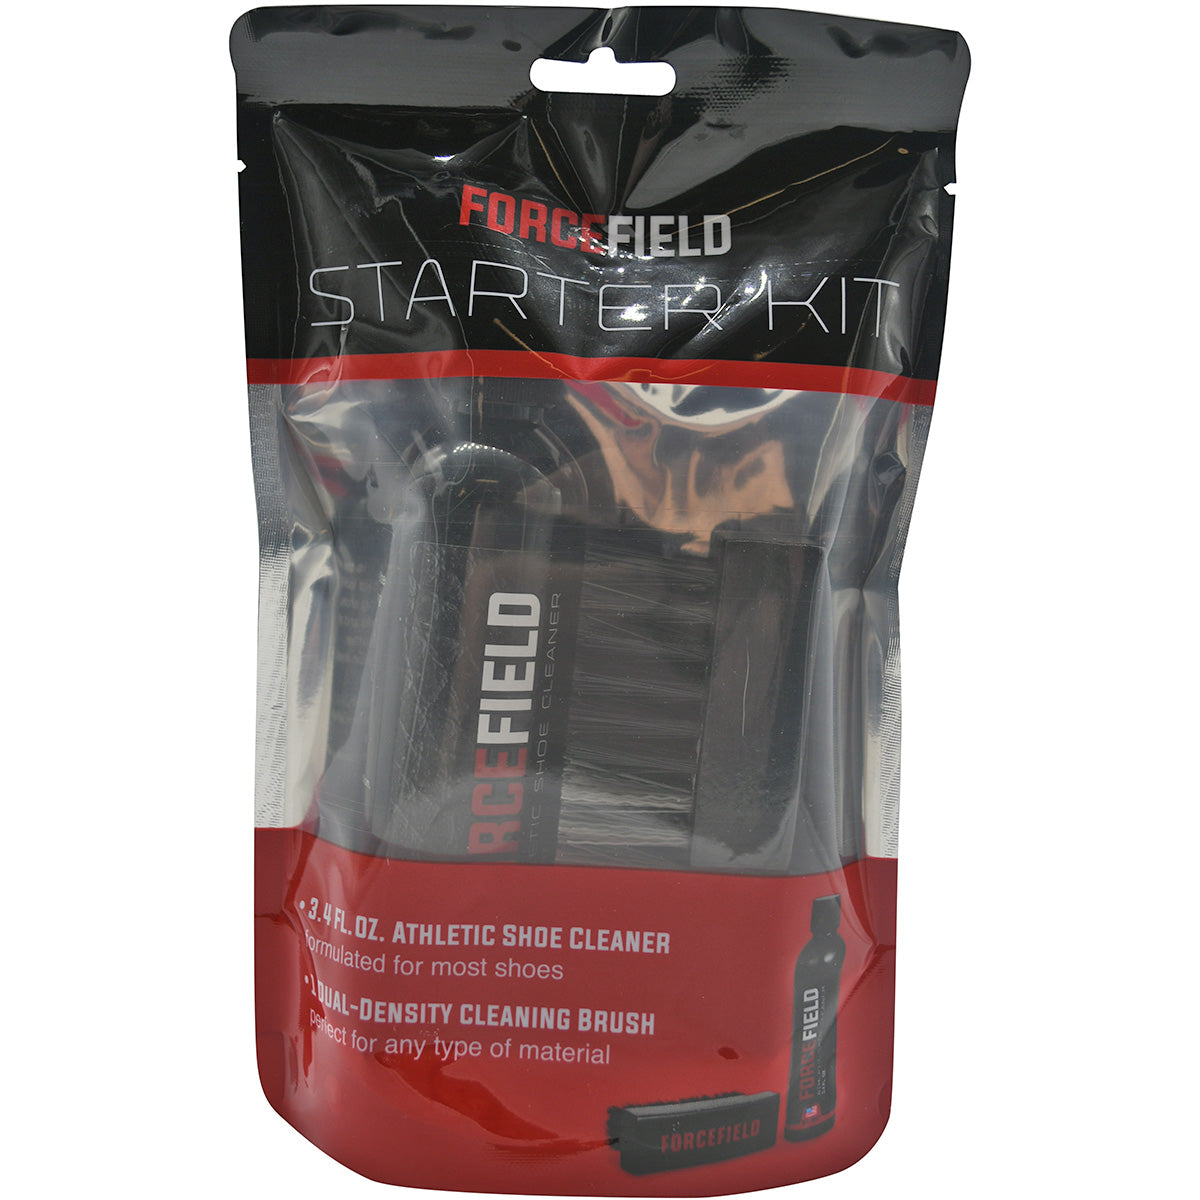 Forcefield Shoe Cleaner Starter Kit Forcefield